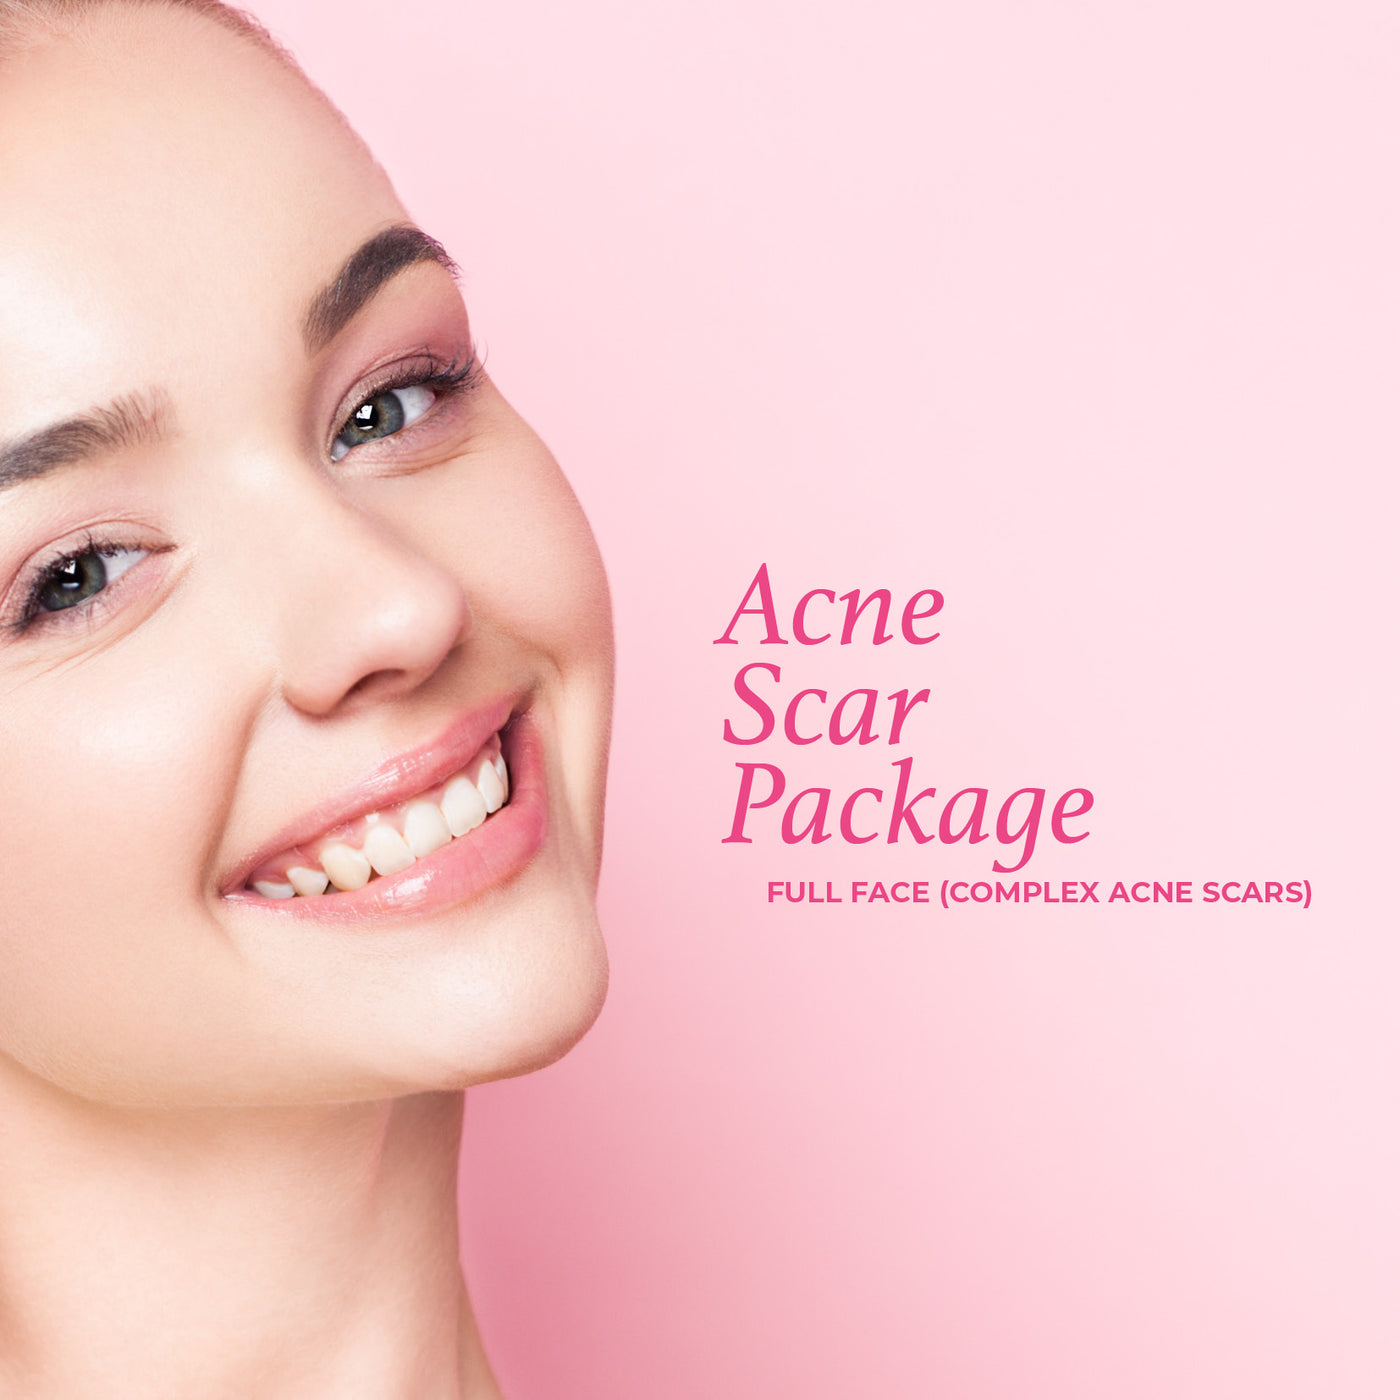 Acne Scar Package - Full Face (complex scars)